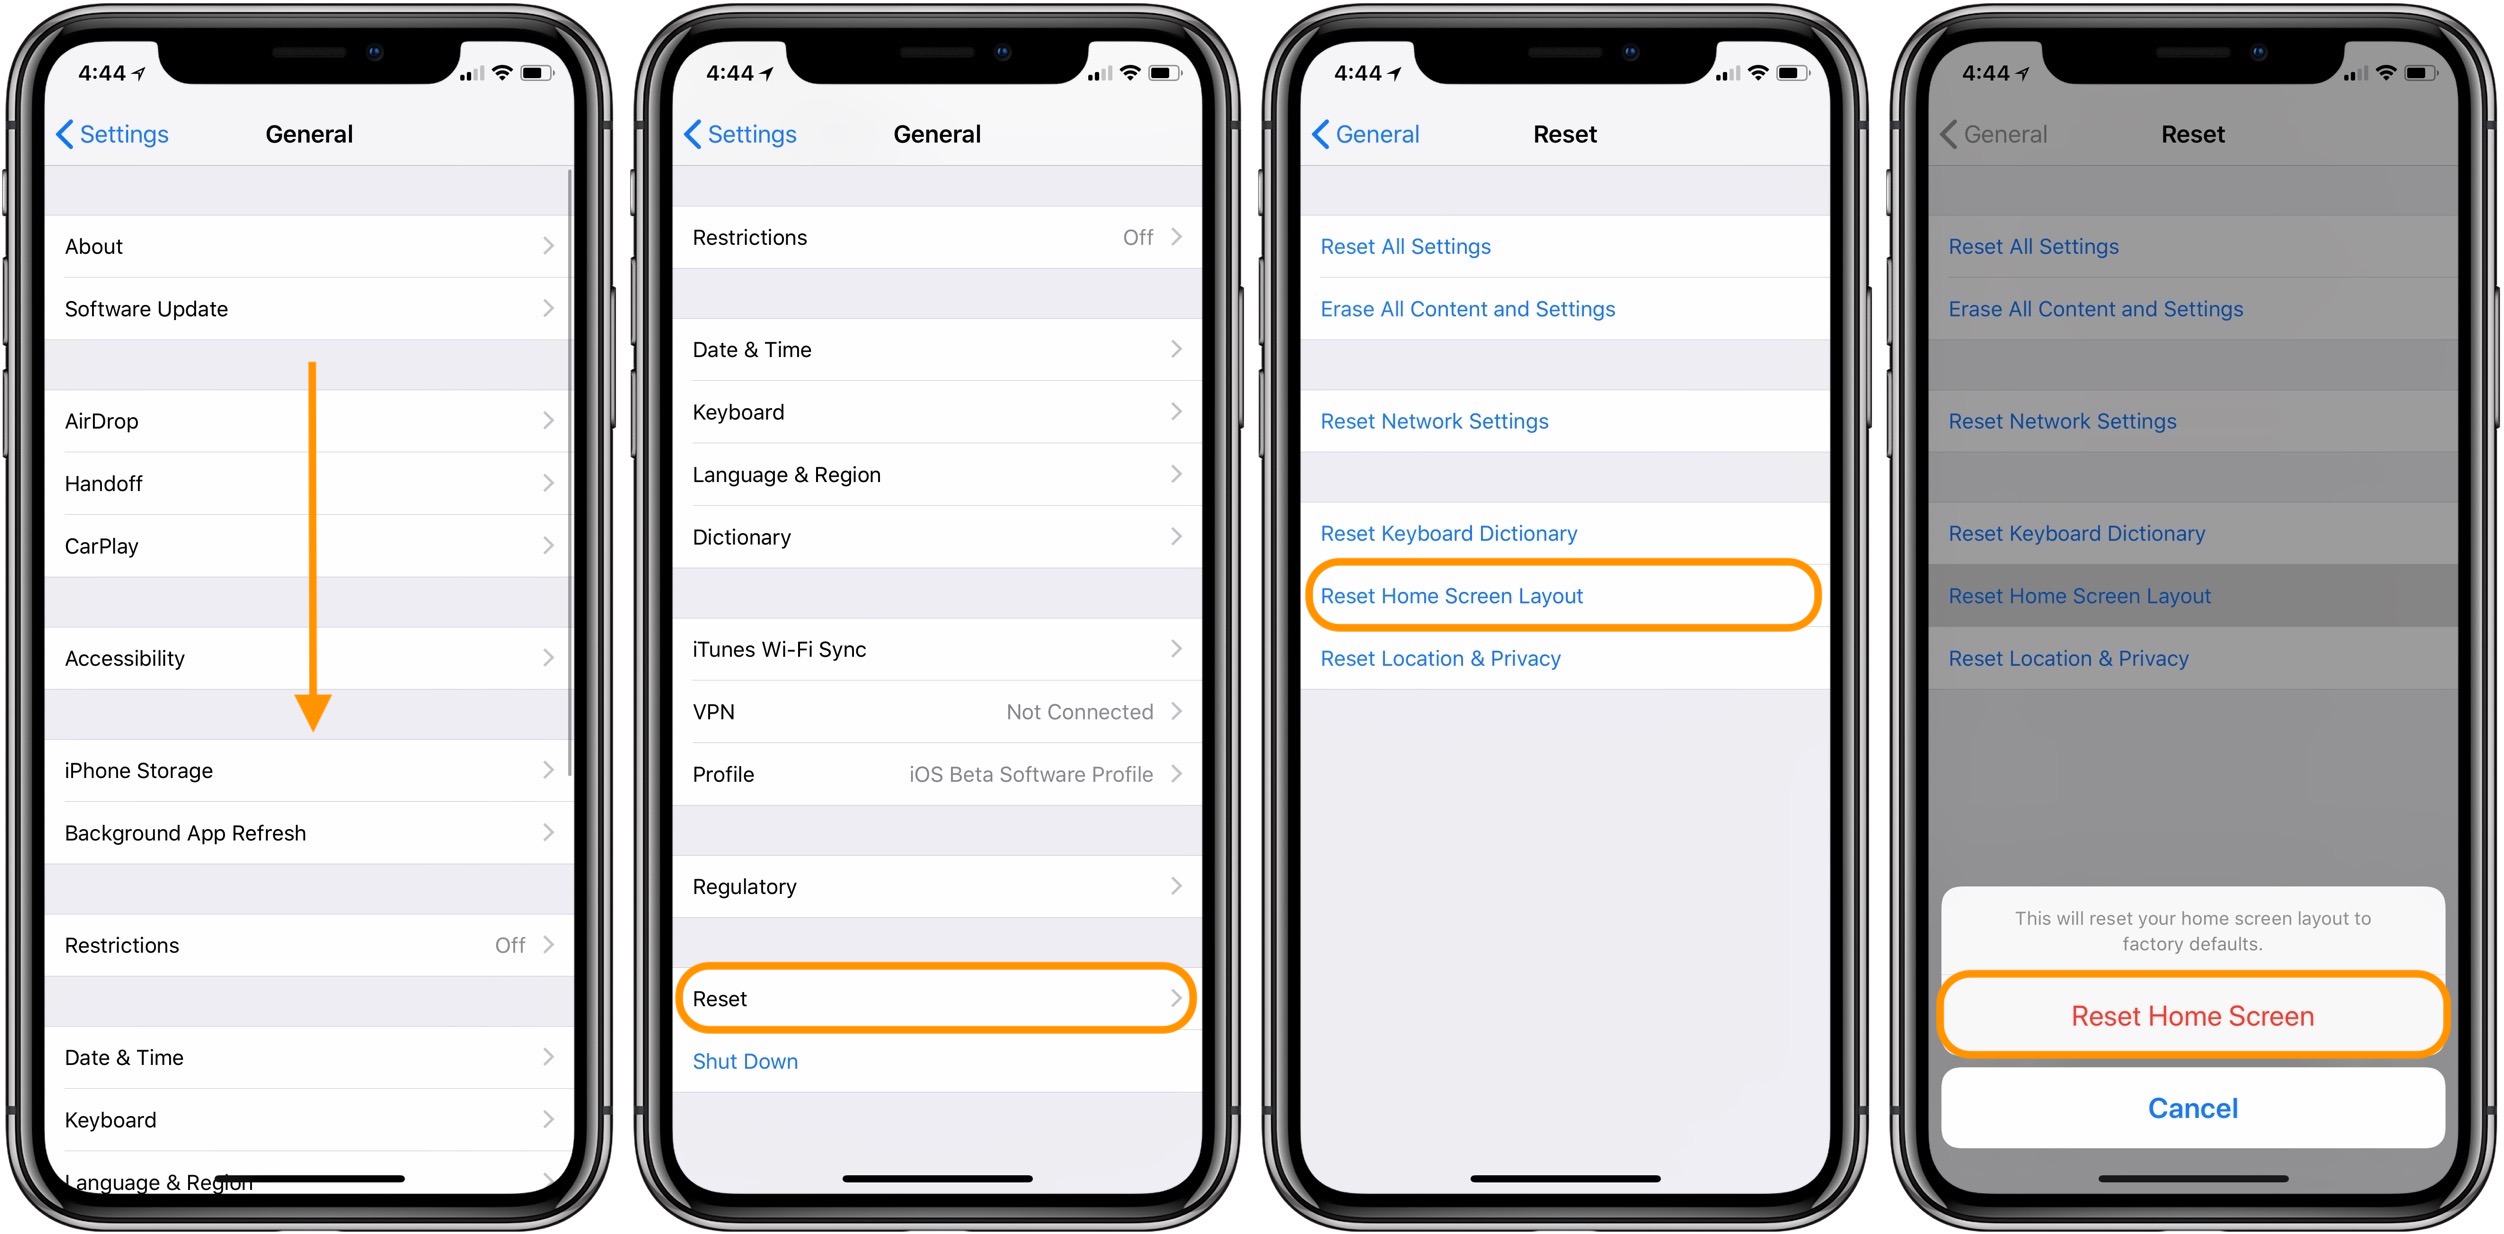 How To Restore The Default Home Screen Layout On Iphone And Ipad 9to5mac